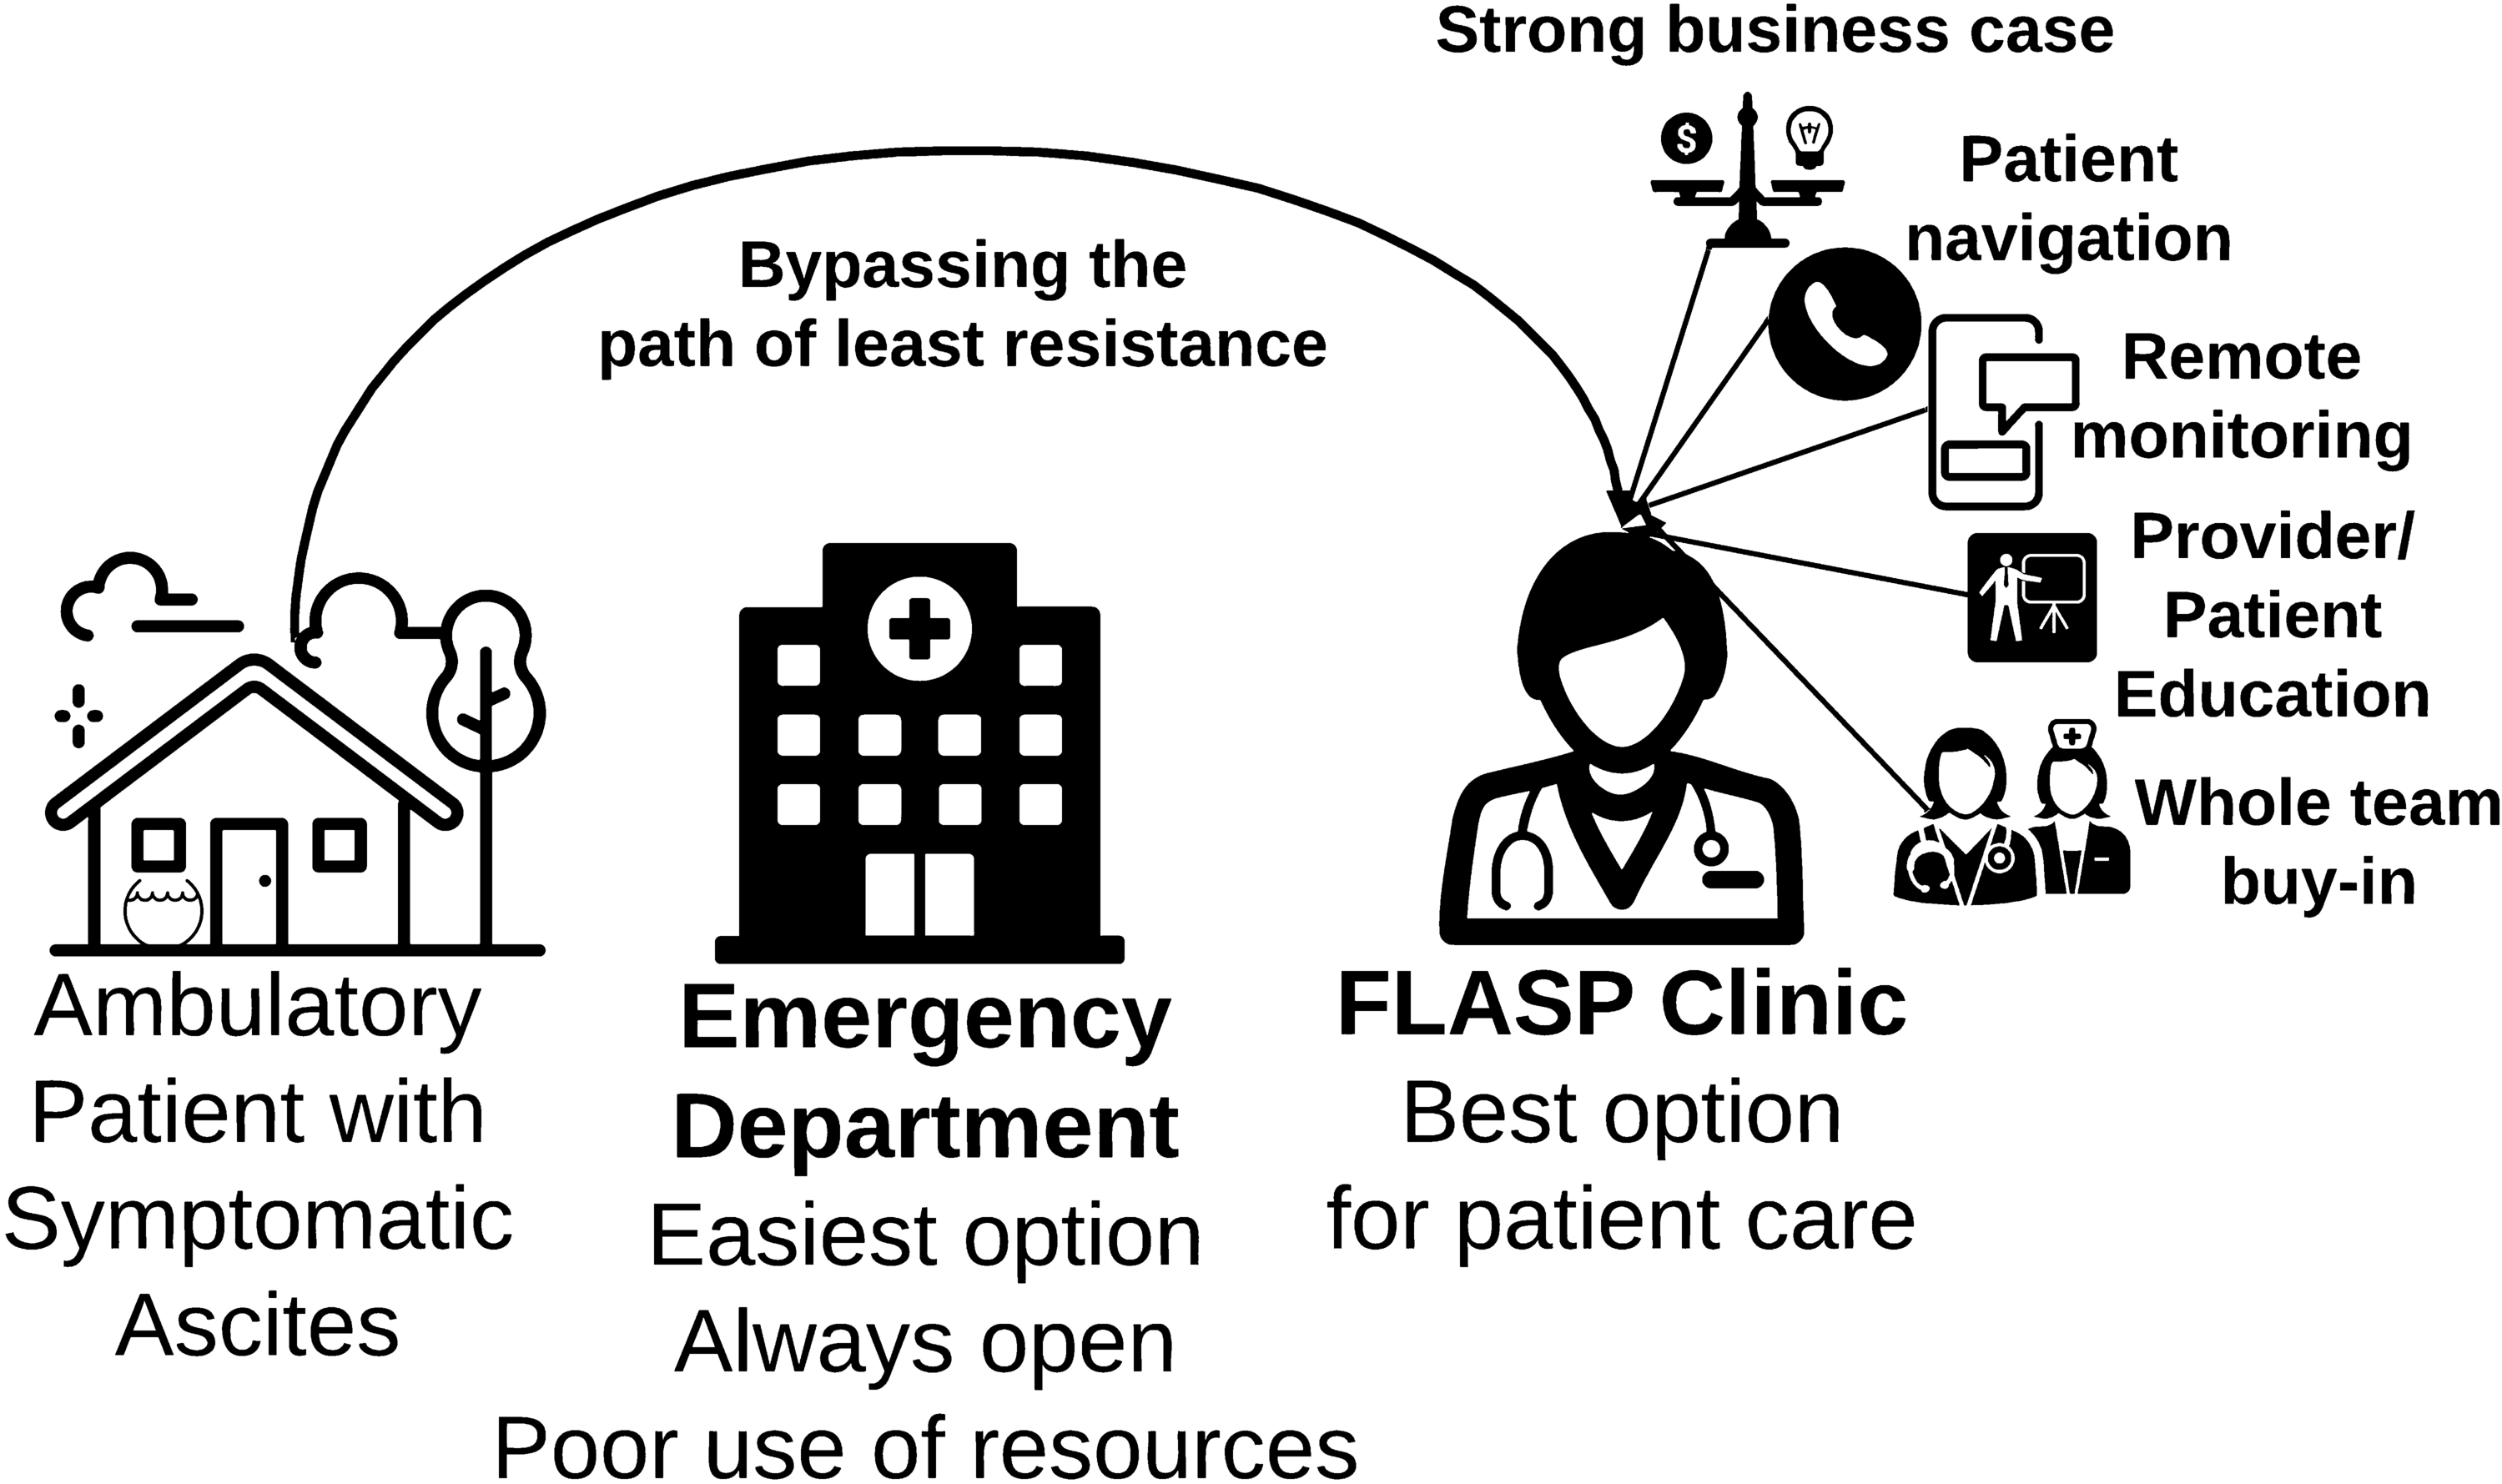 Outpatient Management of Symptomatic Ascites: Bypassing the Path of Least Resistance